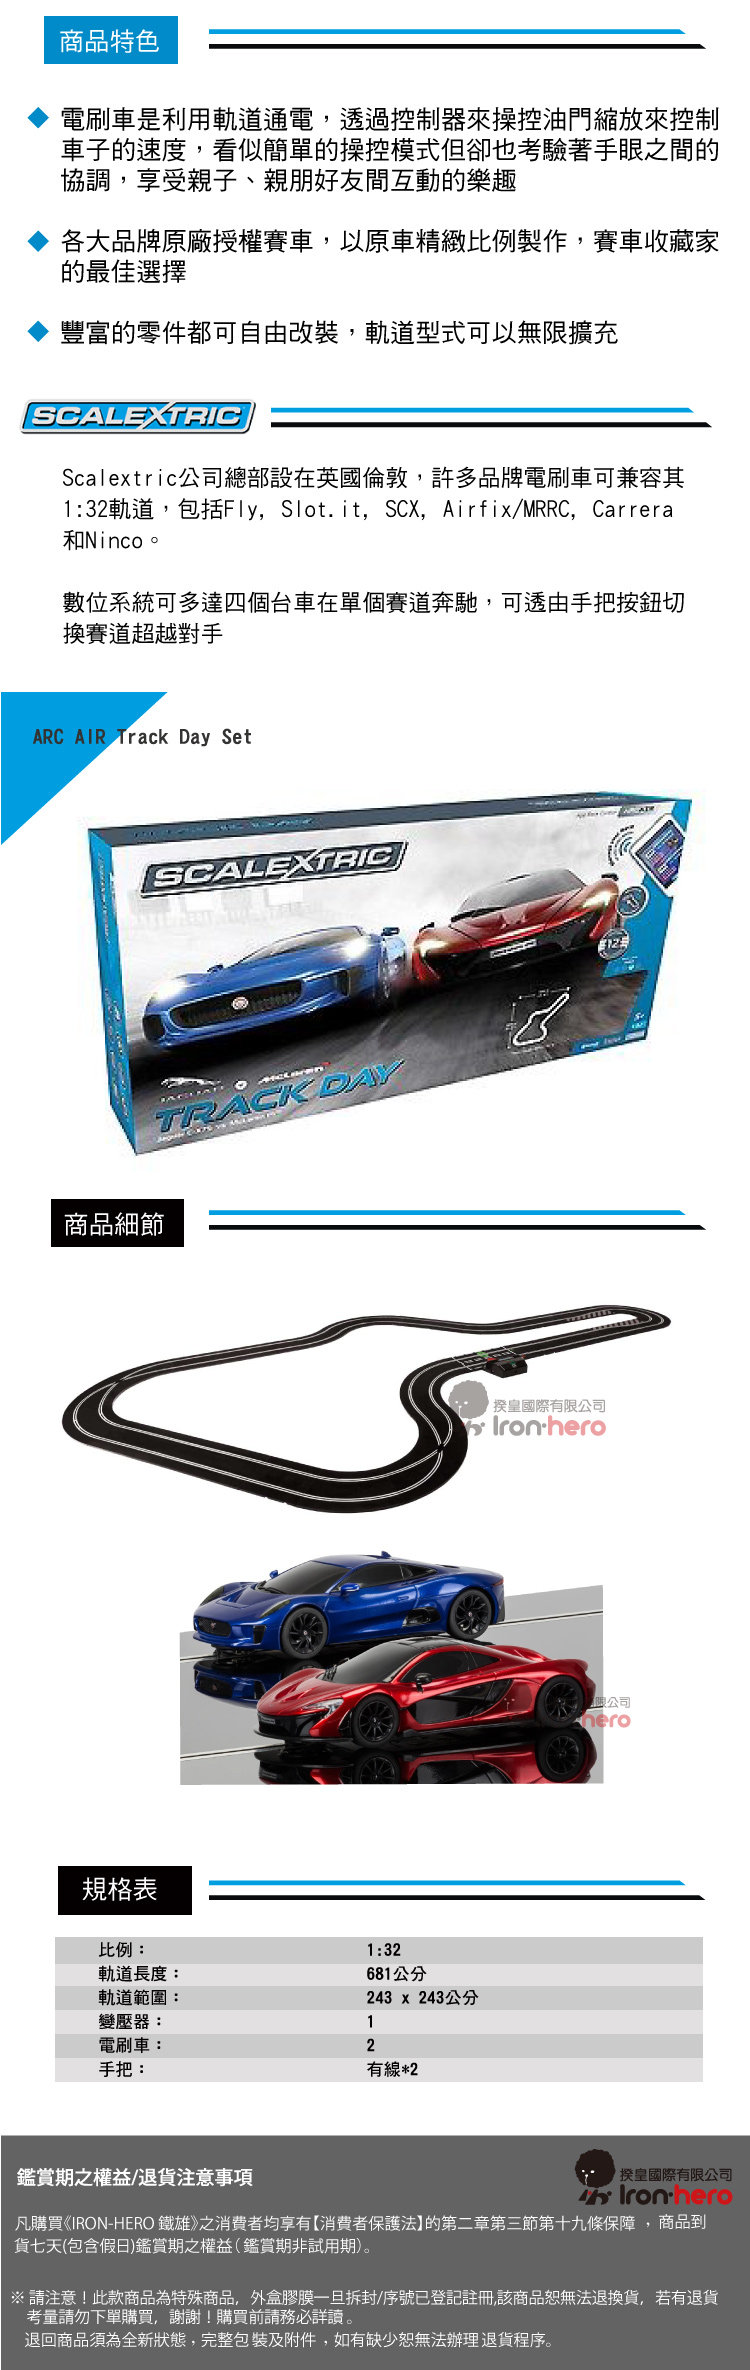 scalextric track day